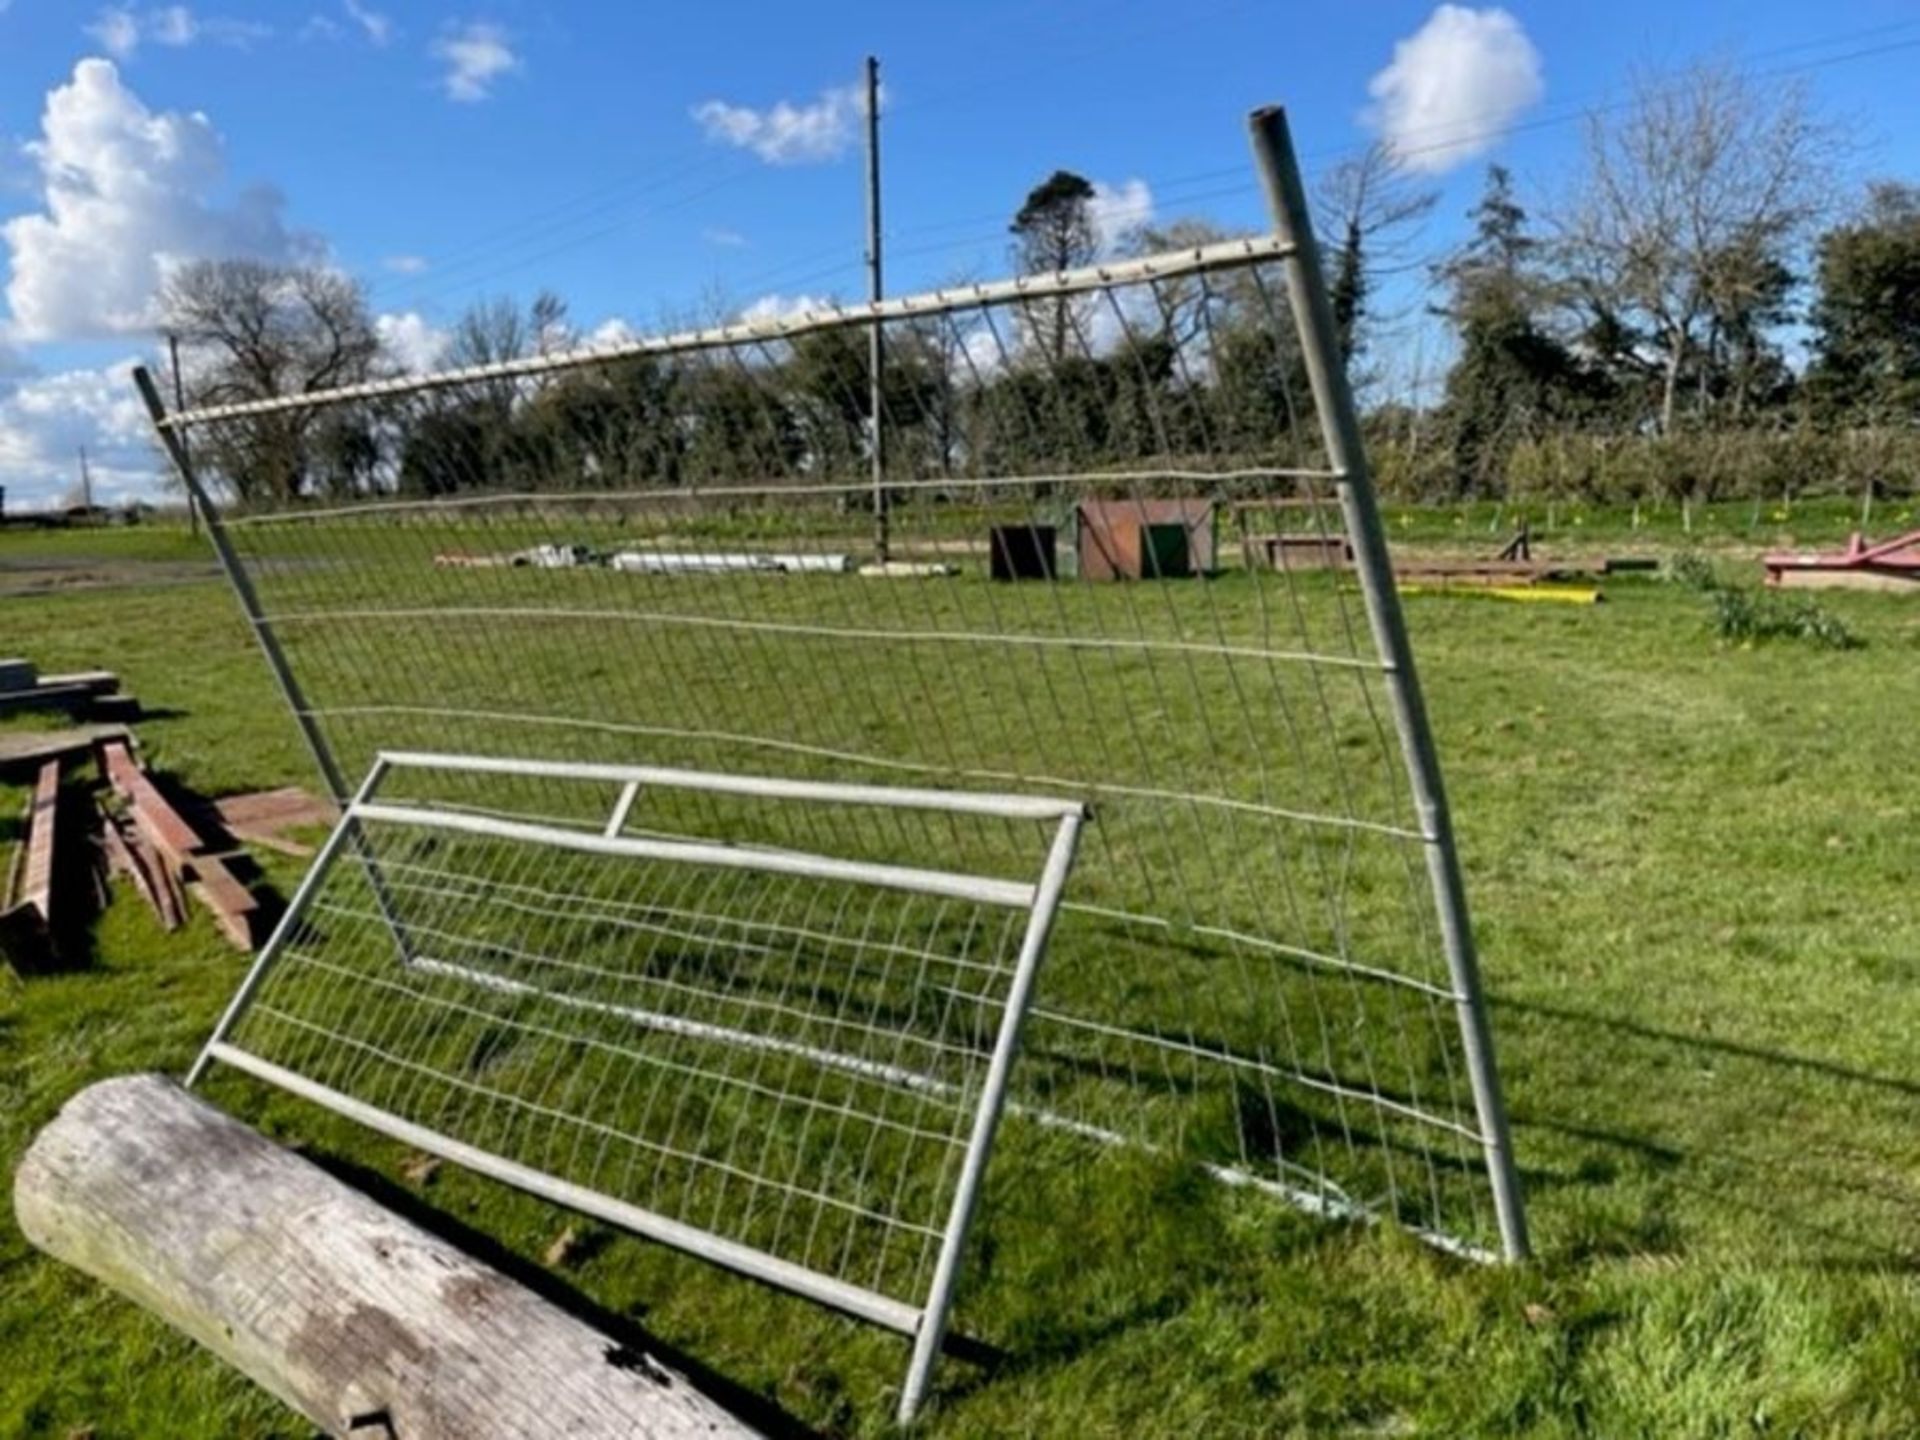 Heras fence and short Heras fence with 4 plastic barriers